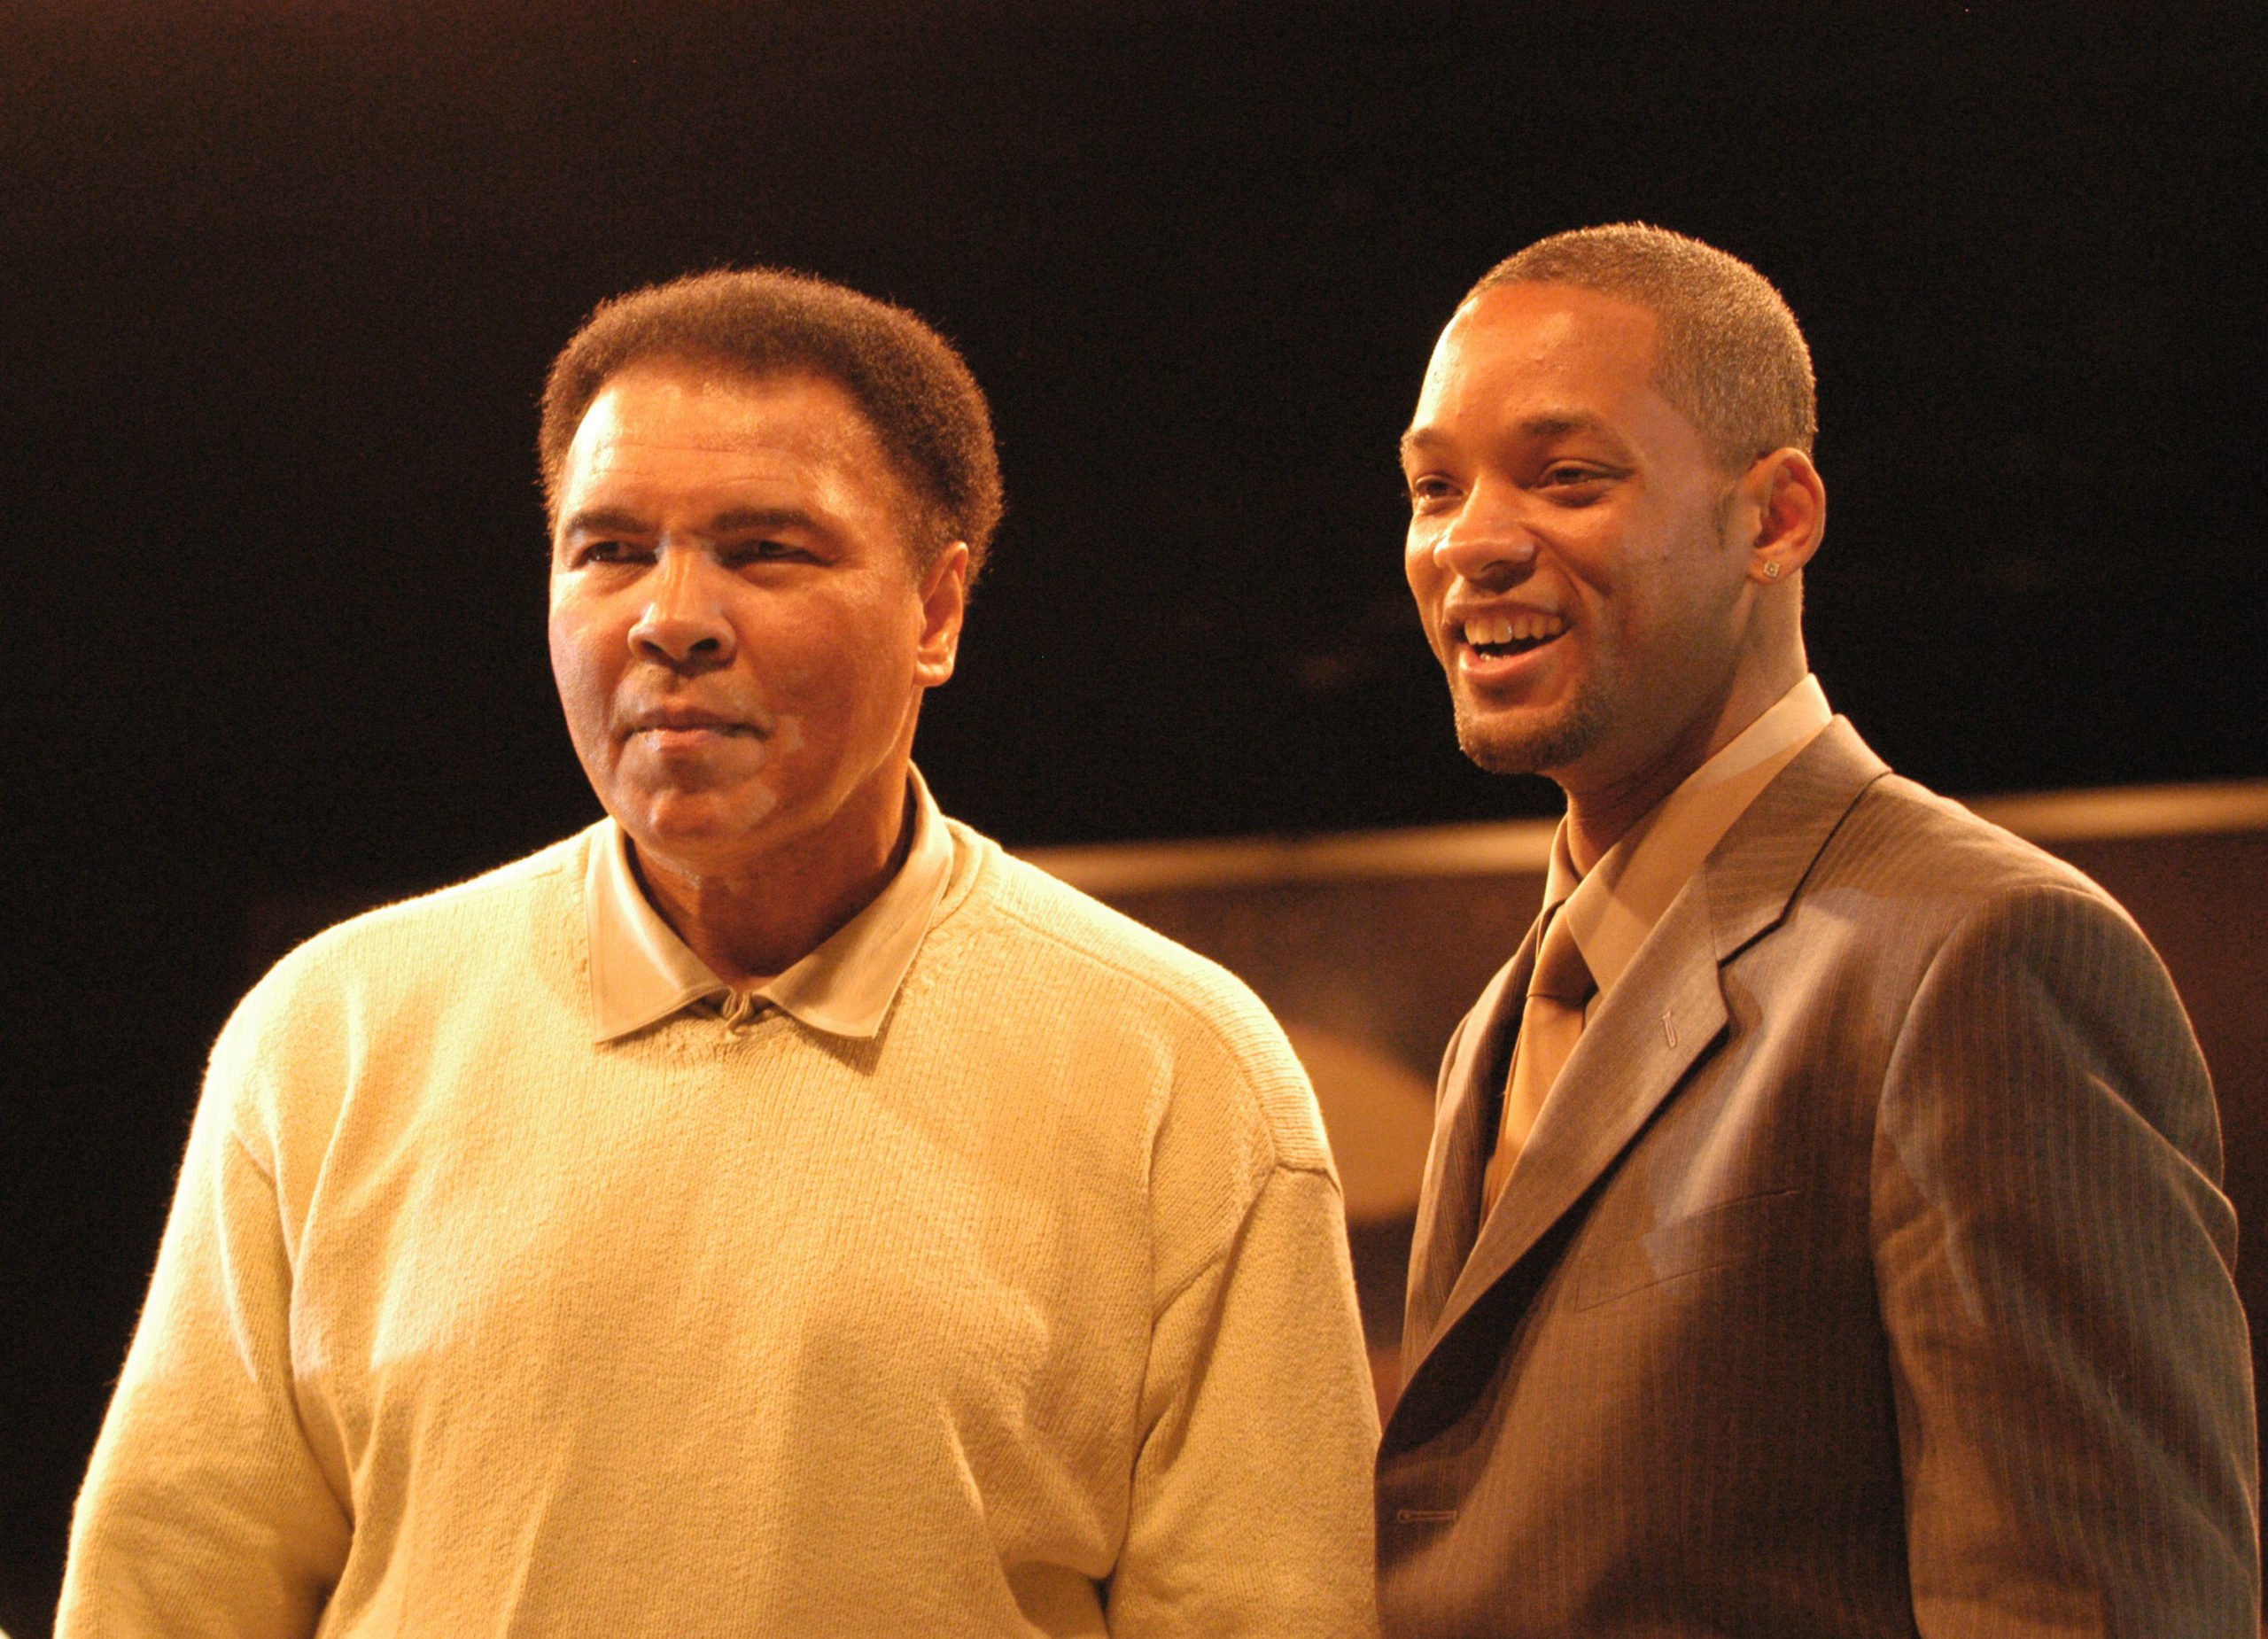 MIAMI - DECEMBER 6: Boxing legend Muhammad Ali (L) stands with actor Will Smith at the Miami Art Basel Taschen book premiere of Ali's new book, "GOAT - Greatest Of All Time" at the Miami Convention Center December 6, 2003 in Miami, Florida. (Photo by Gregorio Binuya/Getty Images)